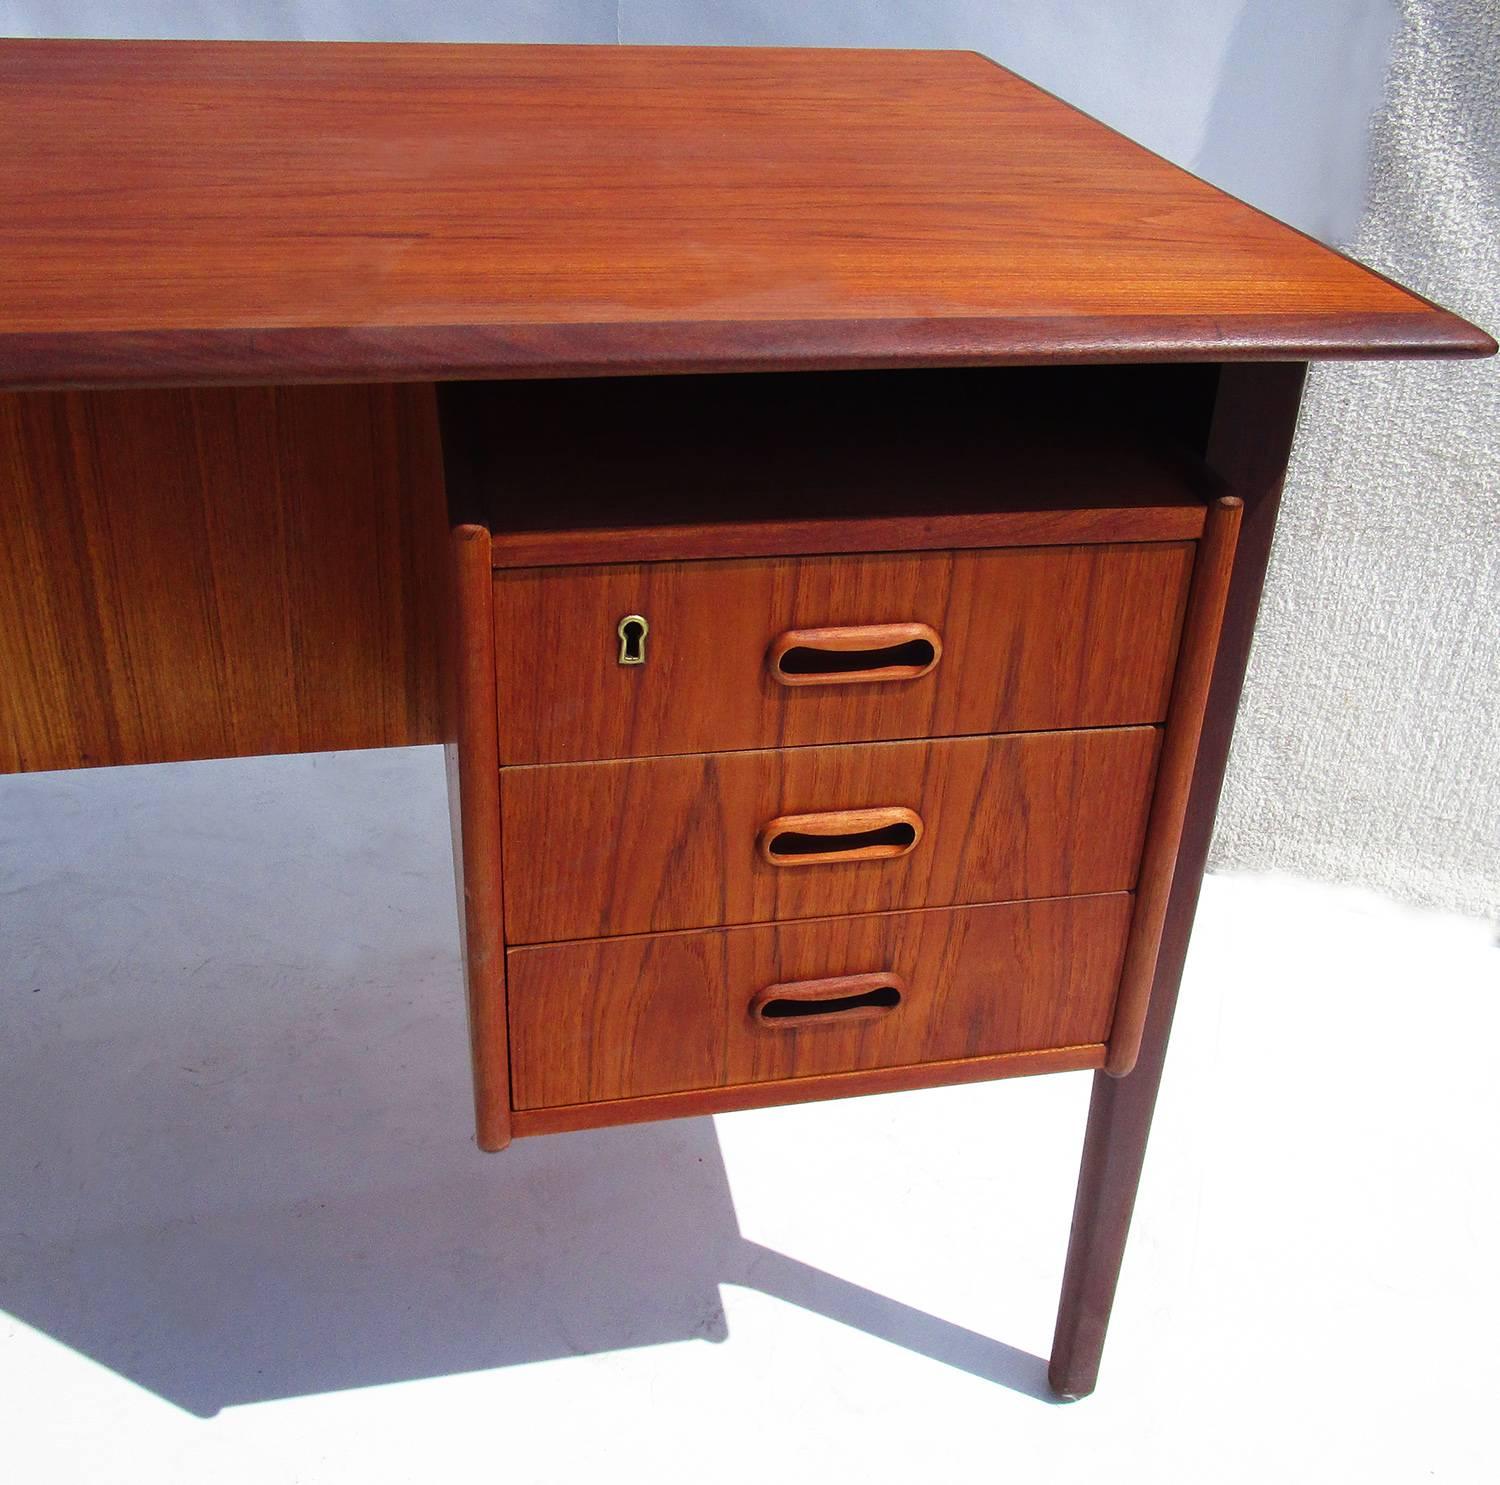 This great desk has all the hallmarks of Classic midcentury Danish design, clean, uncluttered lines and natural woods. The desk is a stained teak wood, and shows well. There are minor signs of wear and a couple water spots on the top surface.